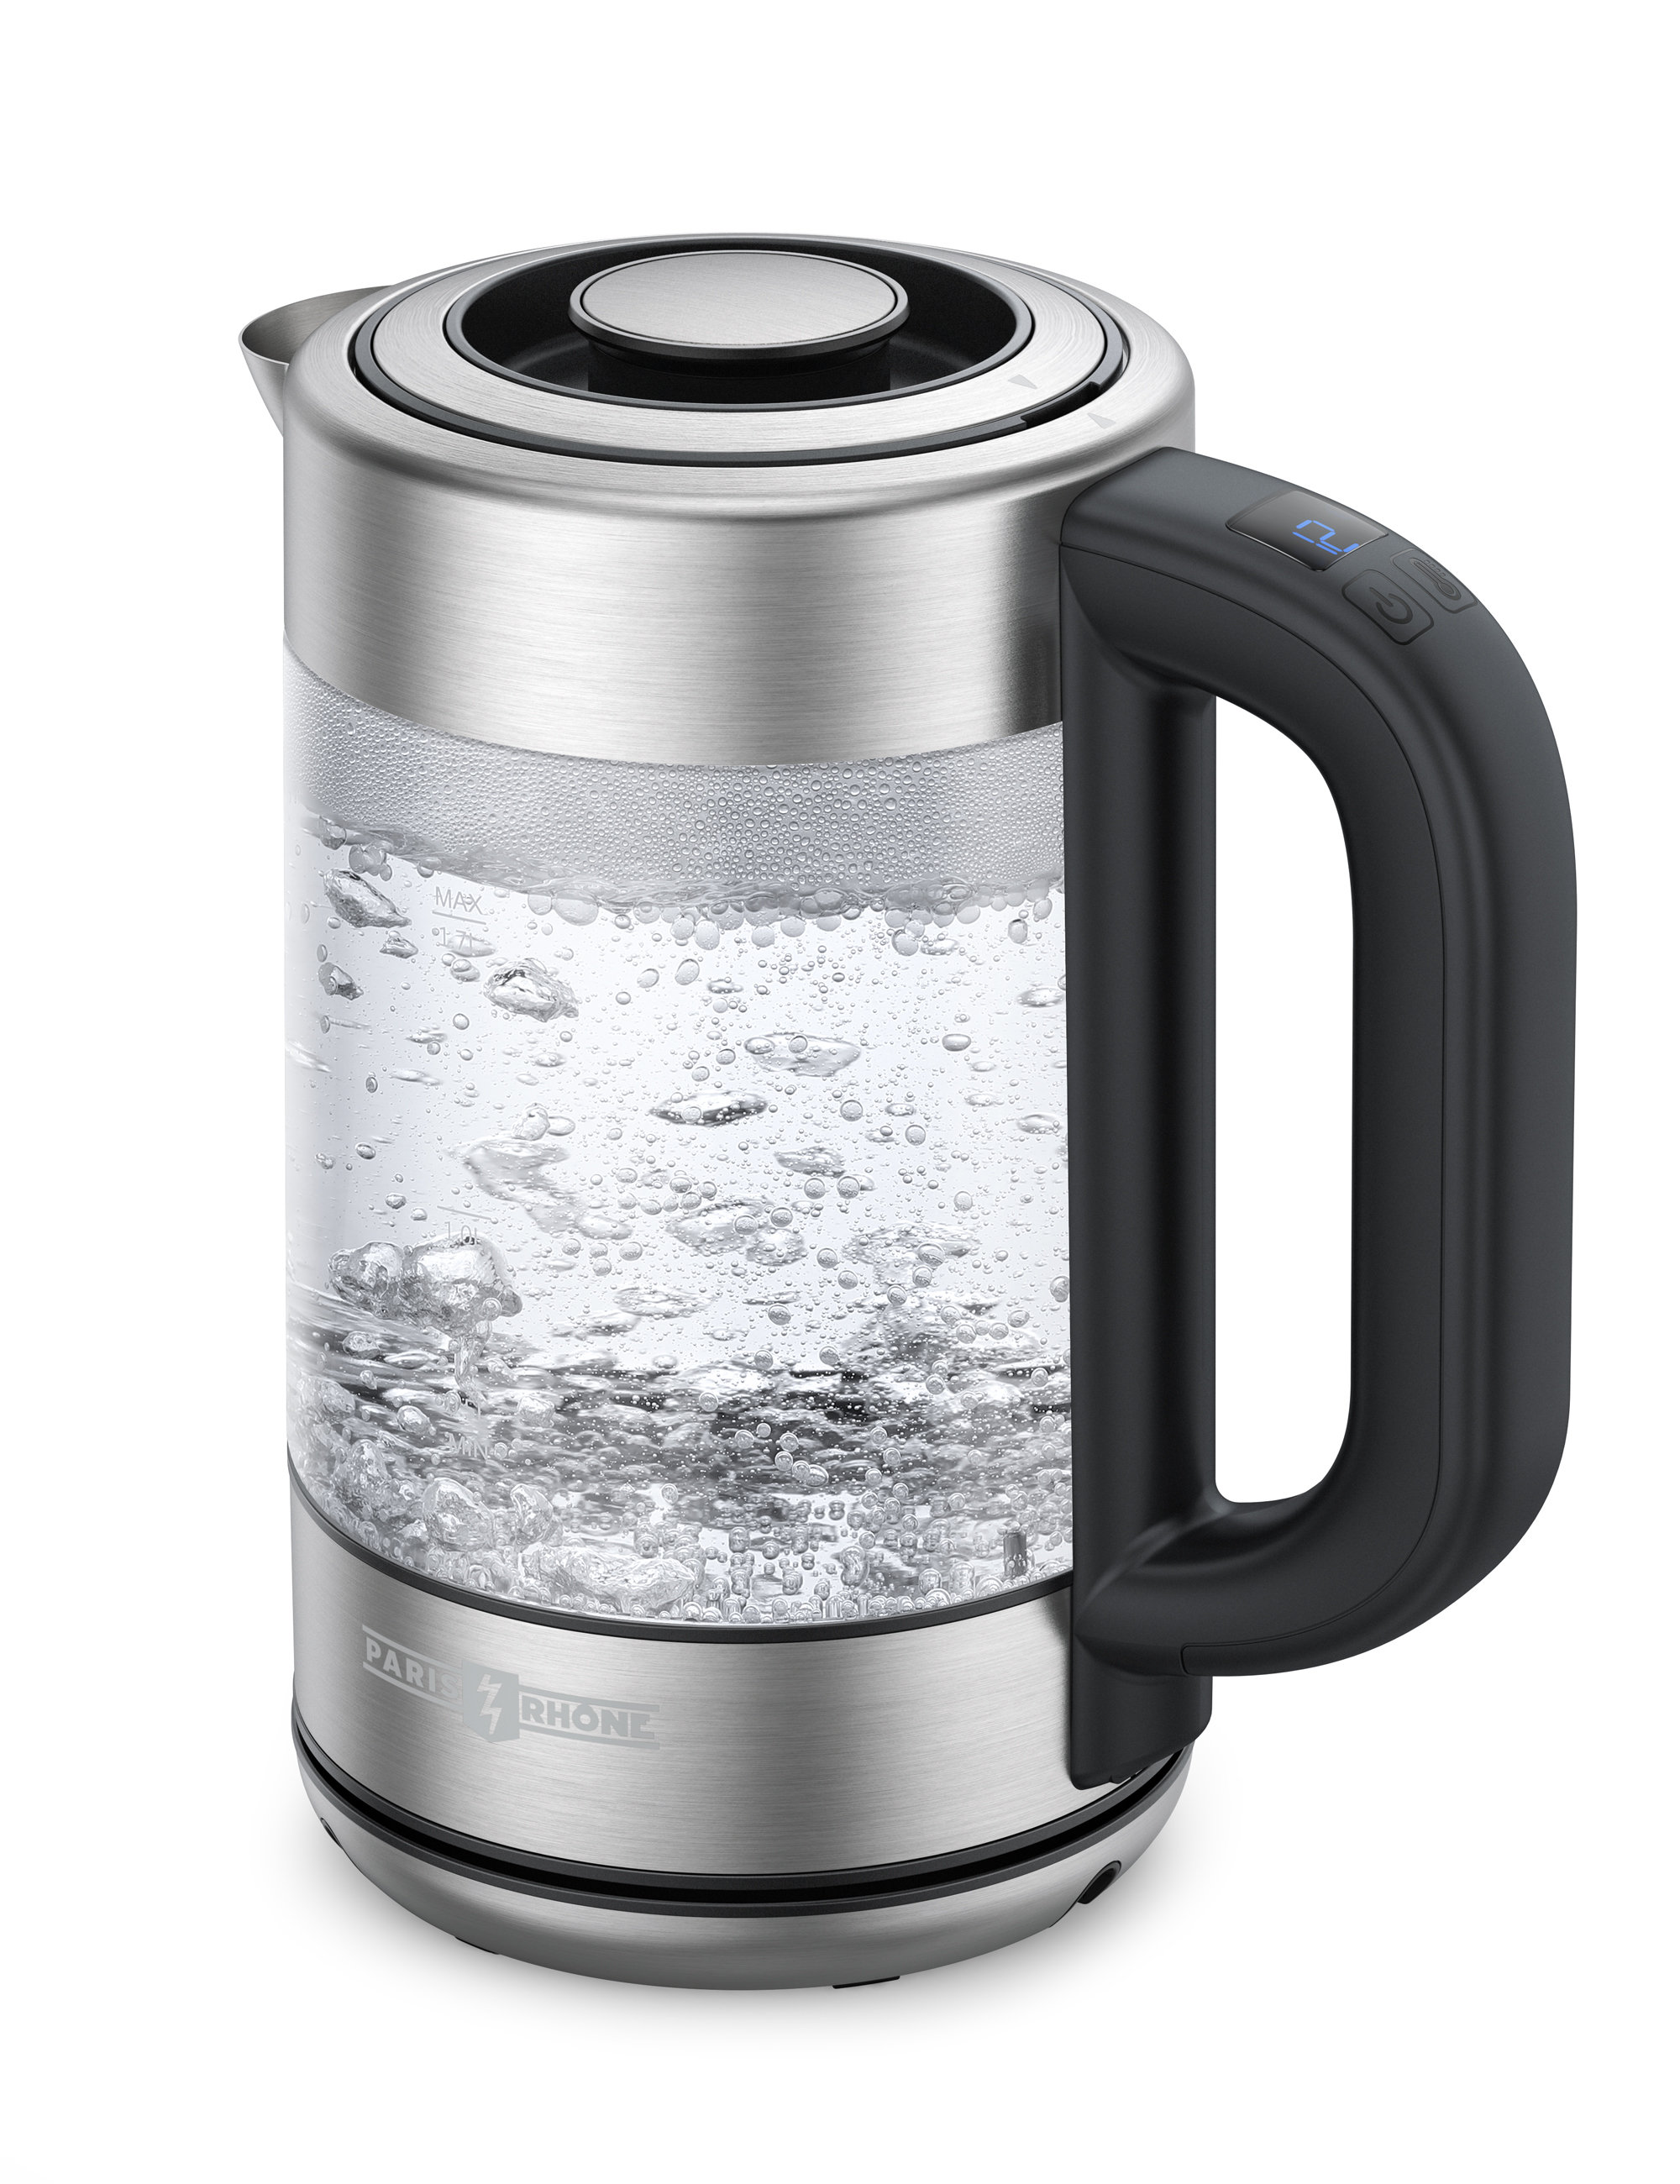  ZWILLING Enfinigy Cool Touch 1-Liter Electric Kettle, Cordless  Tea Kettle & Hot Water - Silver: Home & Kitchen